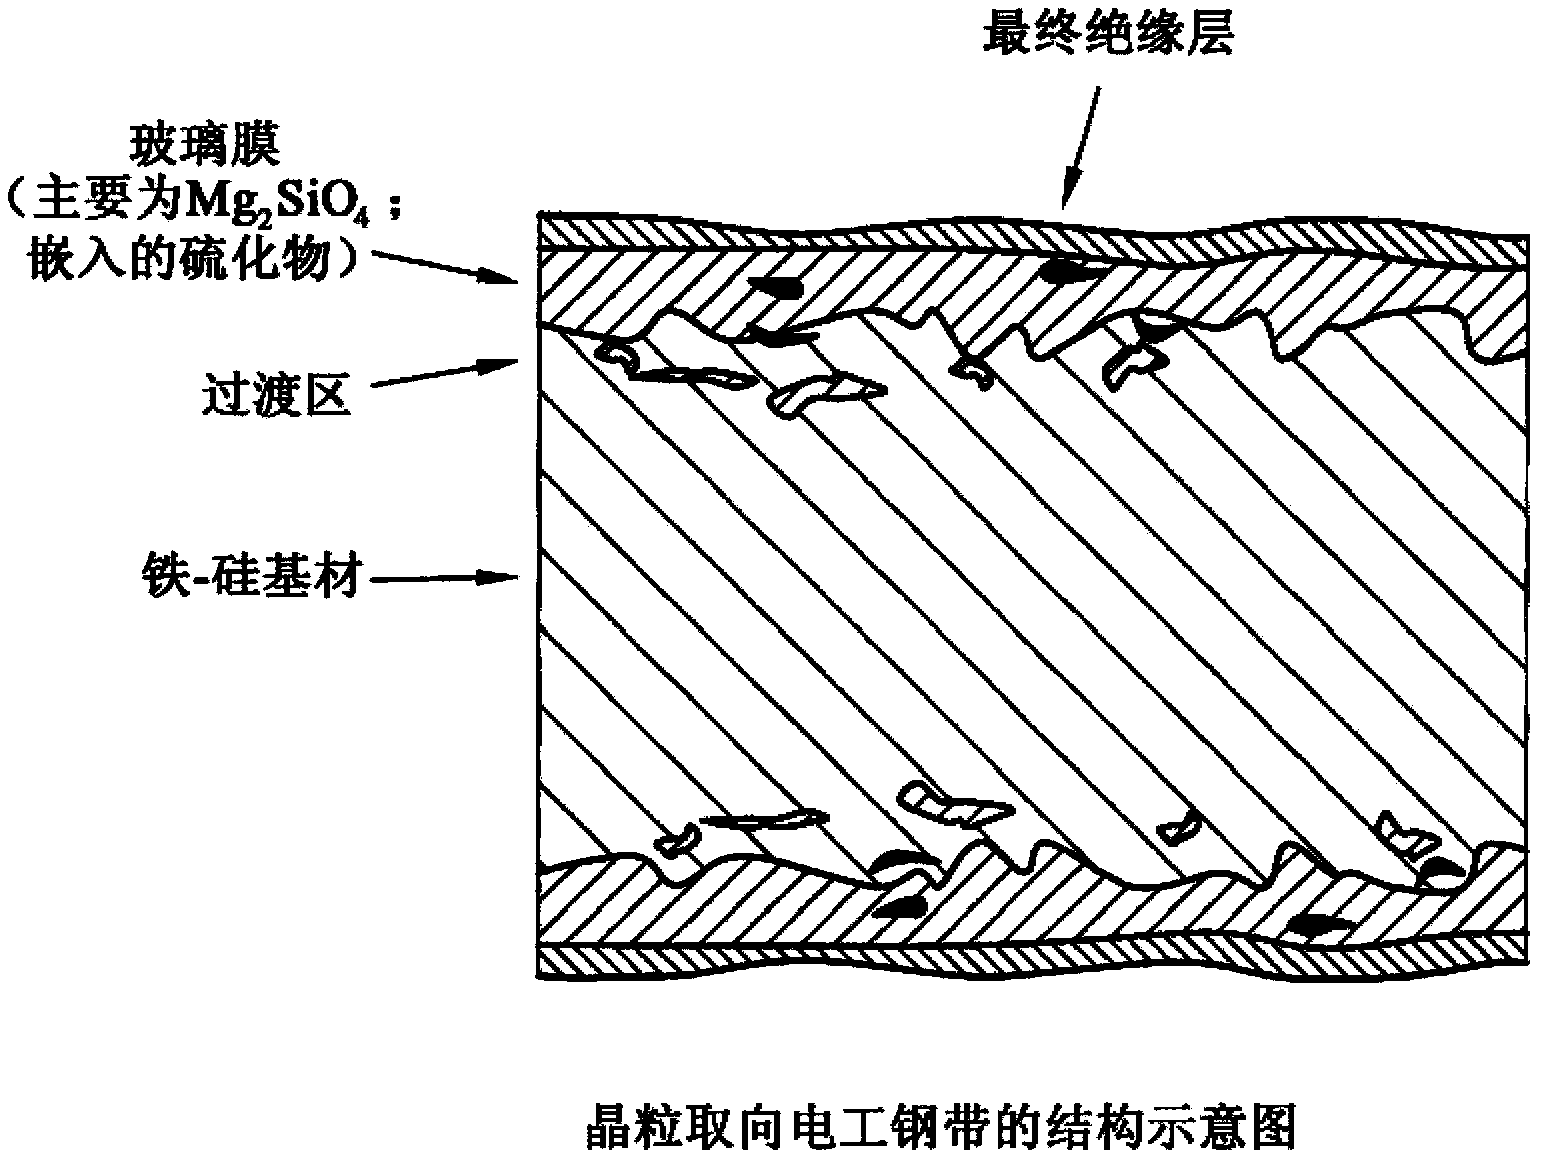 Method for producing a grain-oriented electric strip